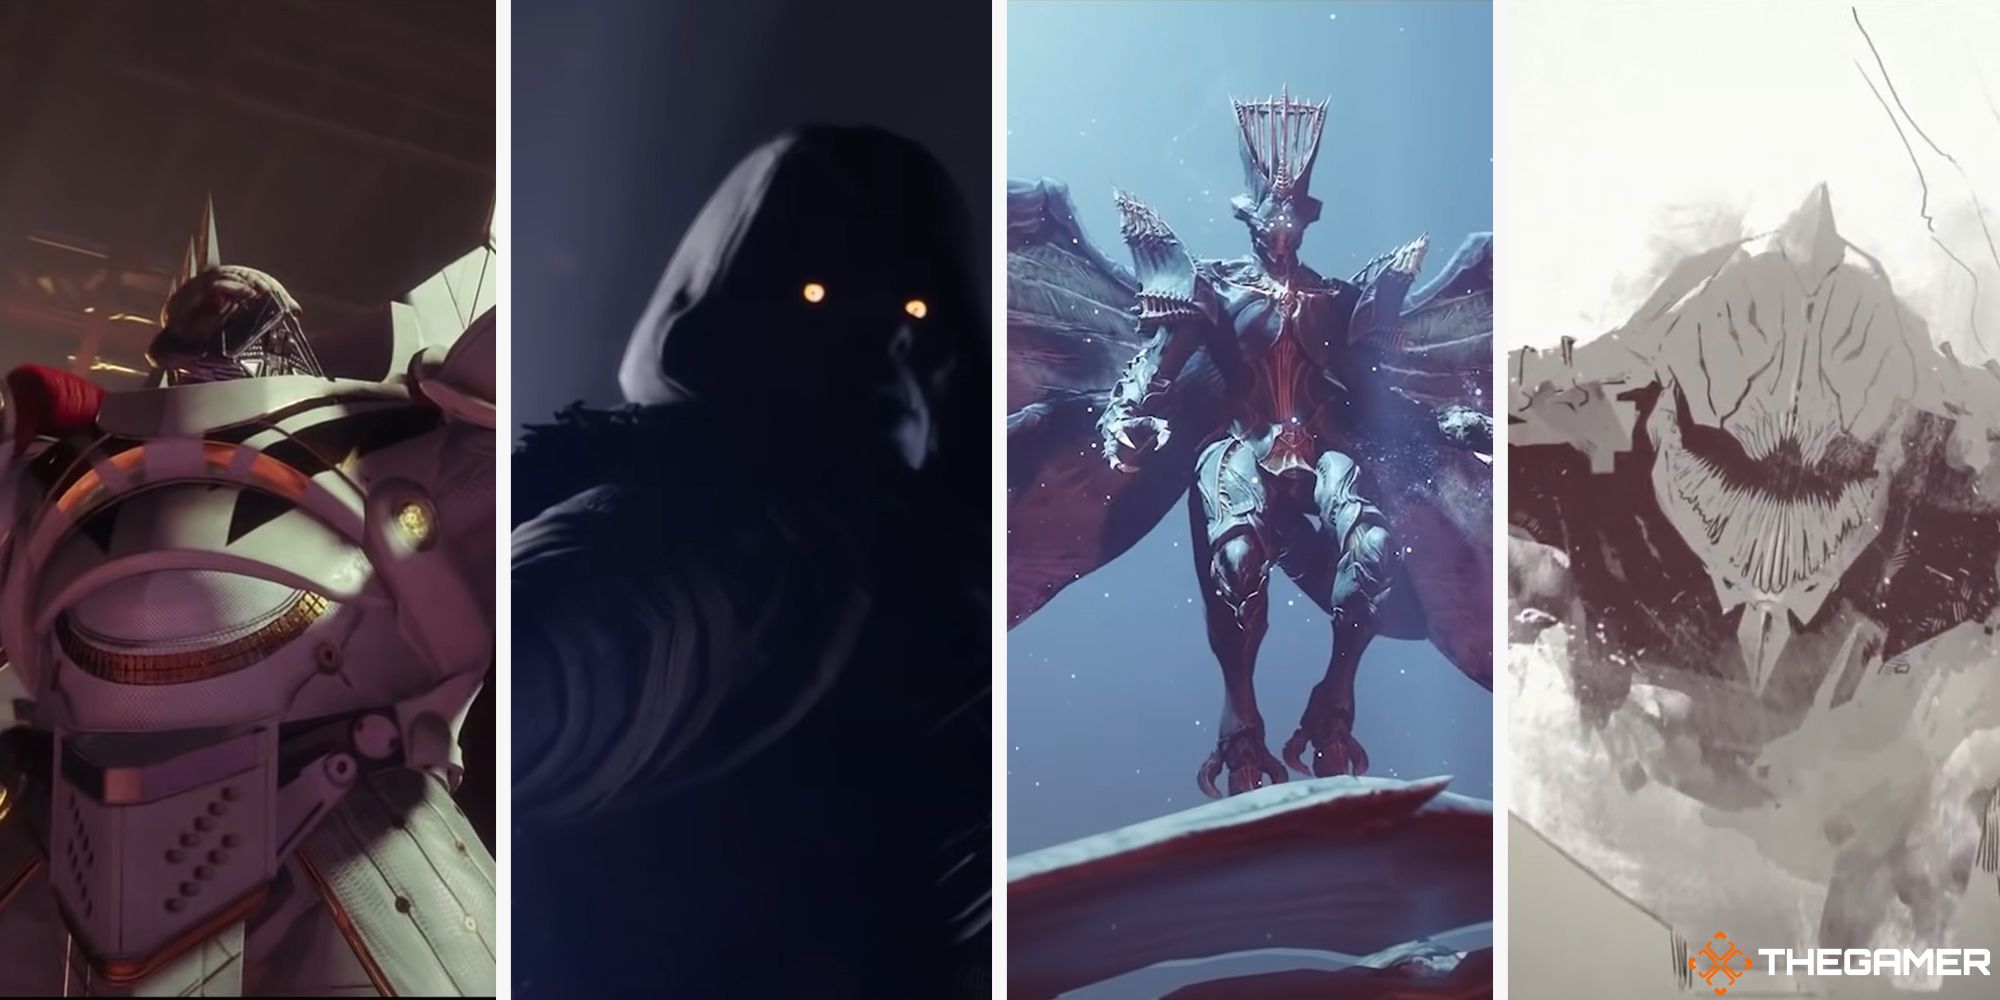 Featured Image of Ghaul, Uldren Sov, Savathun, and Riven from Destiny 2